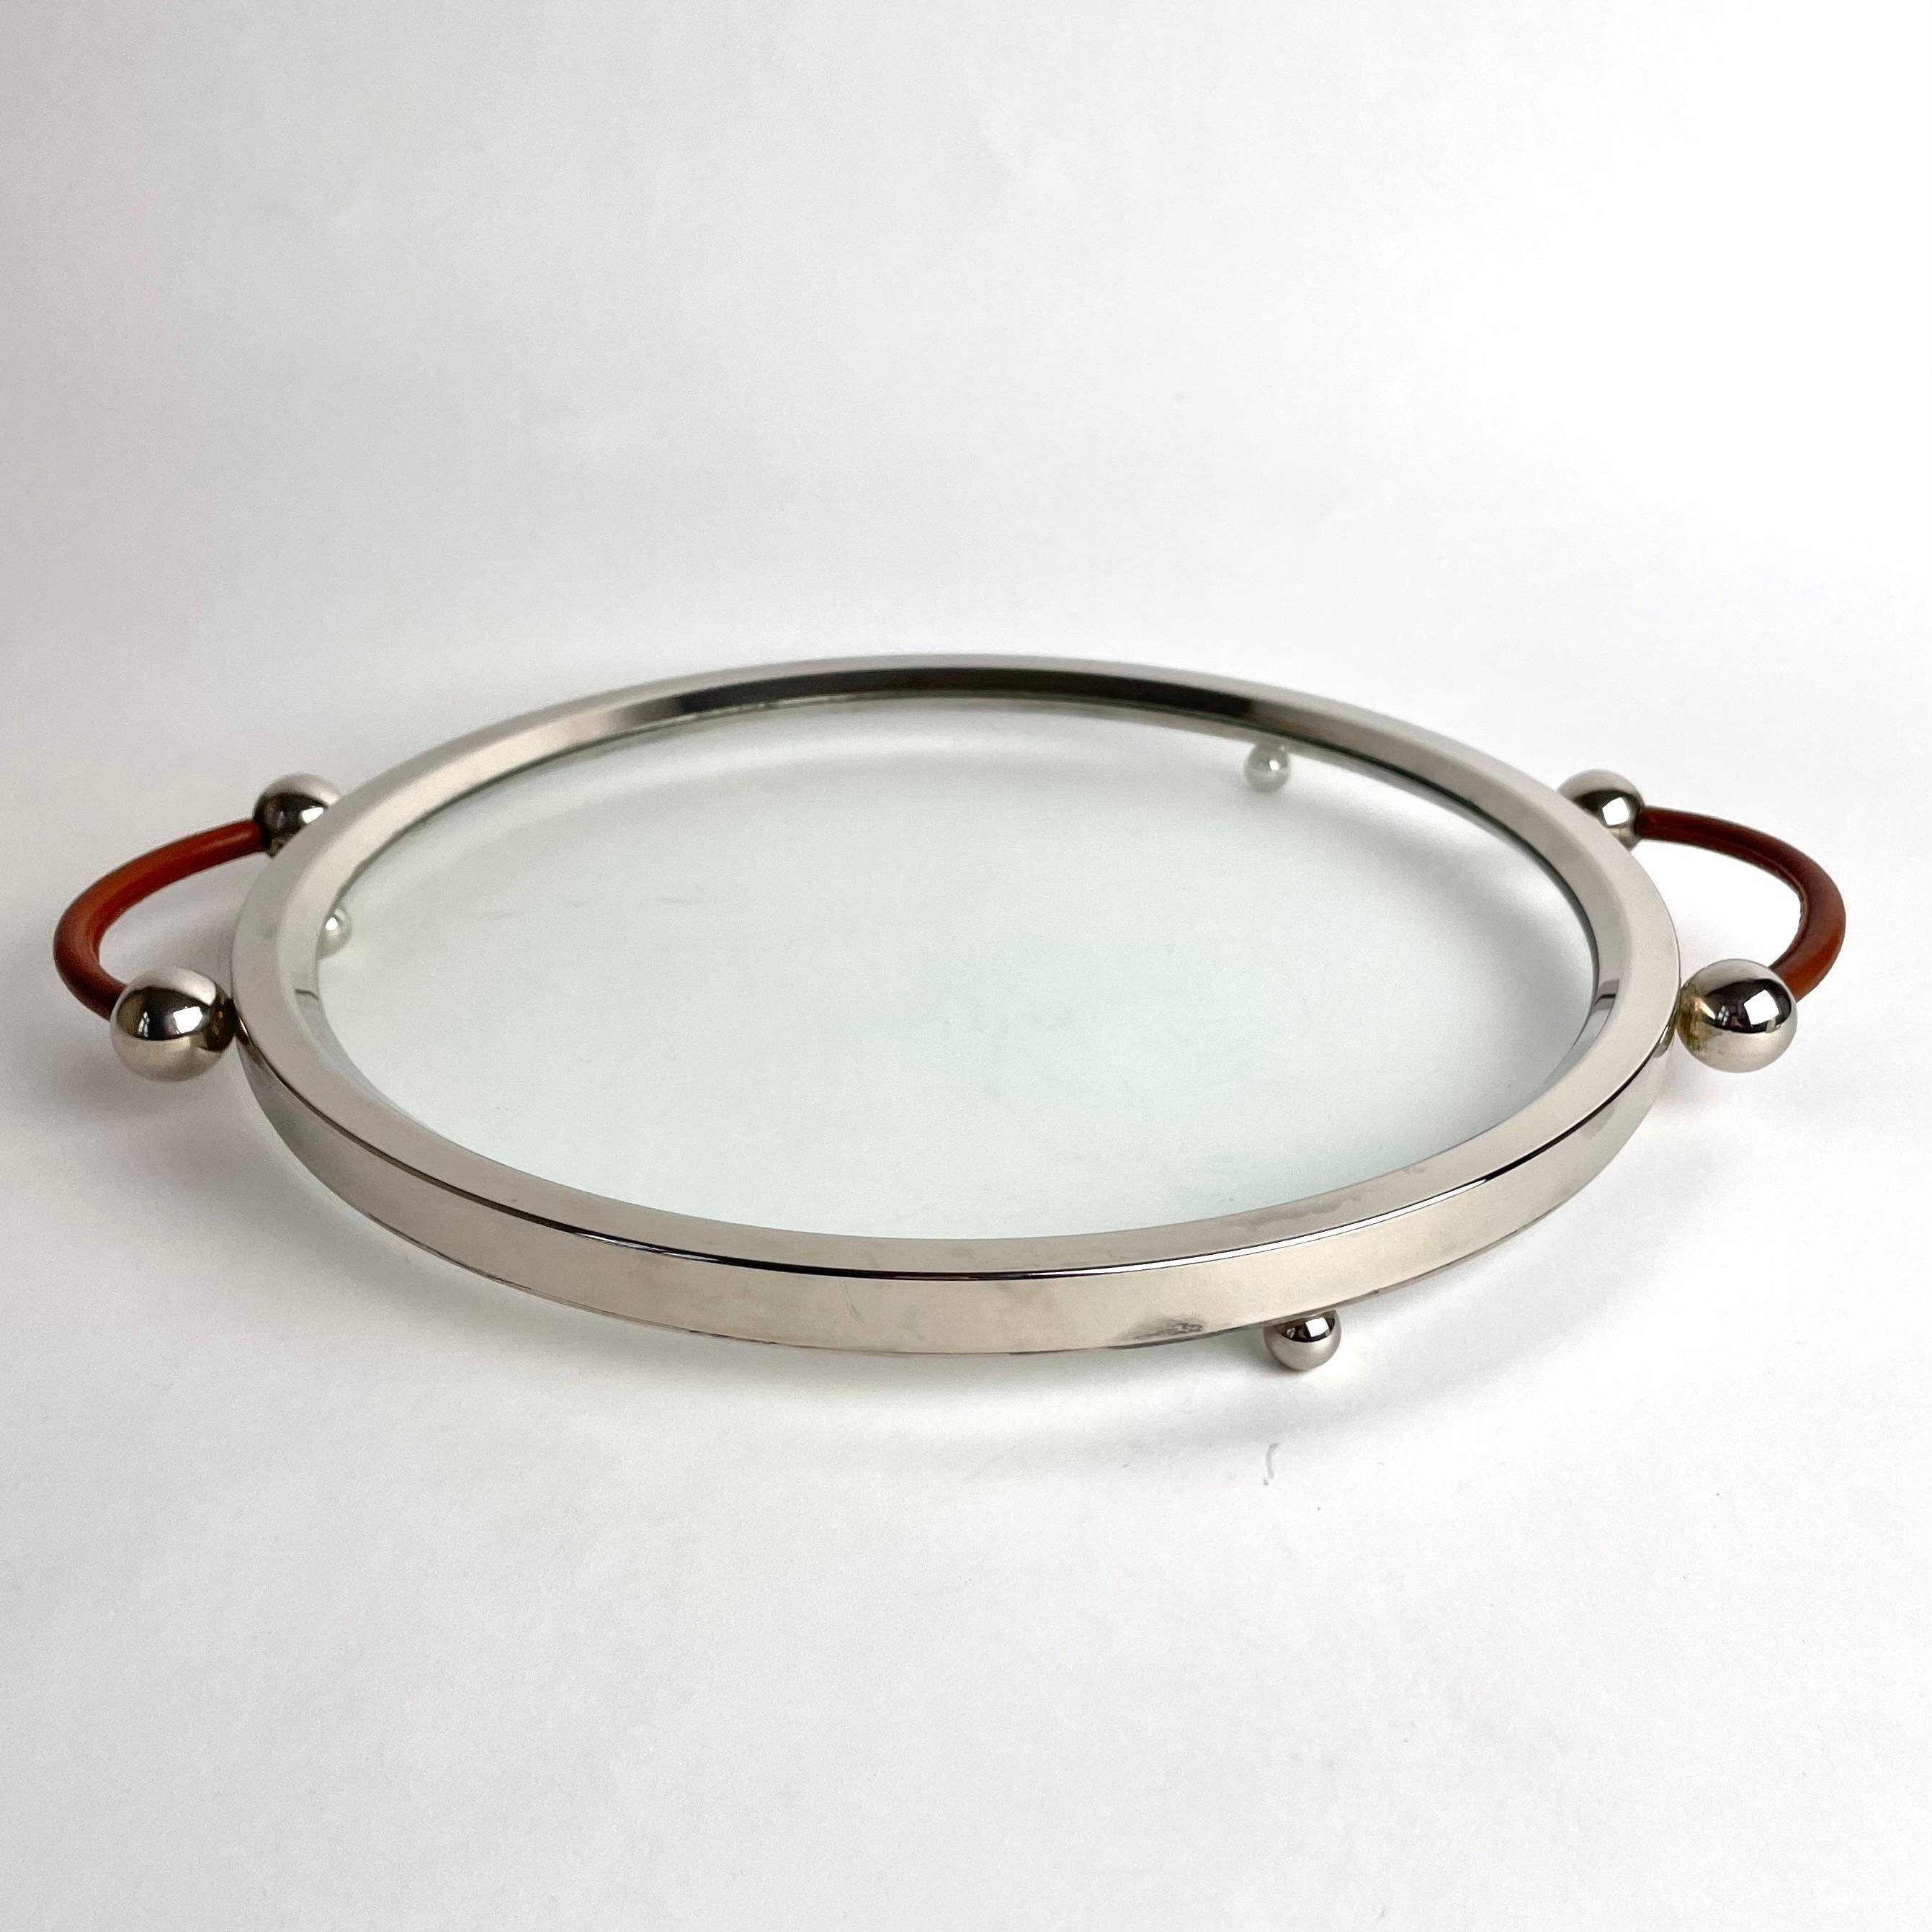 European Elegant Art Deco Cocktail Tray from the 1920s in glass, silver plate and leather For Sale